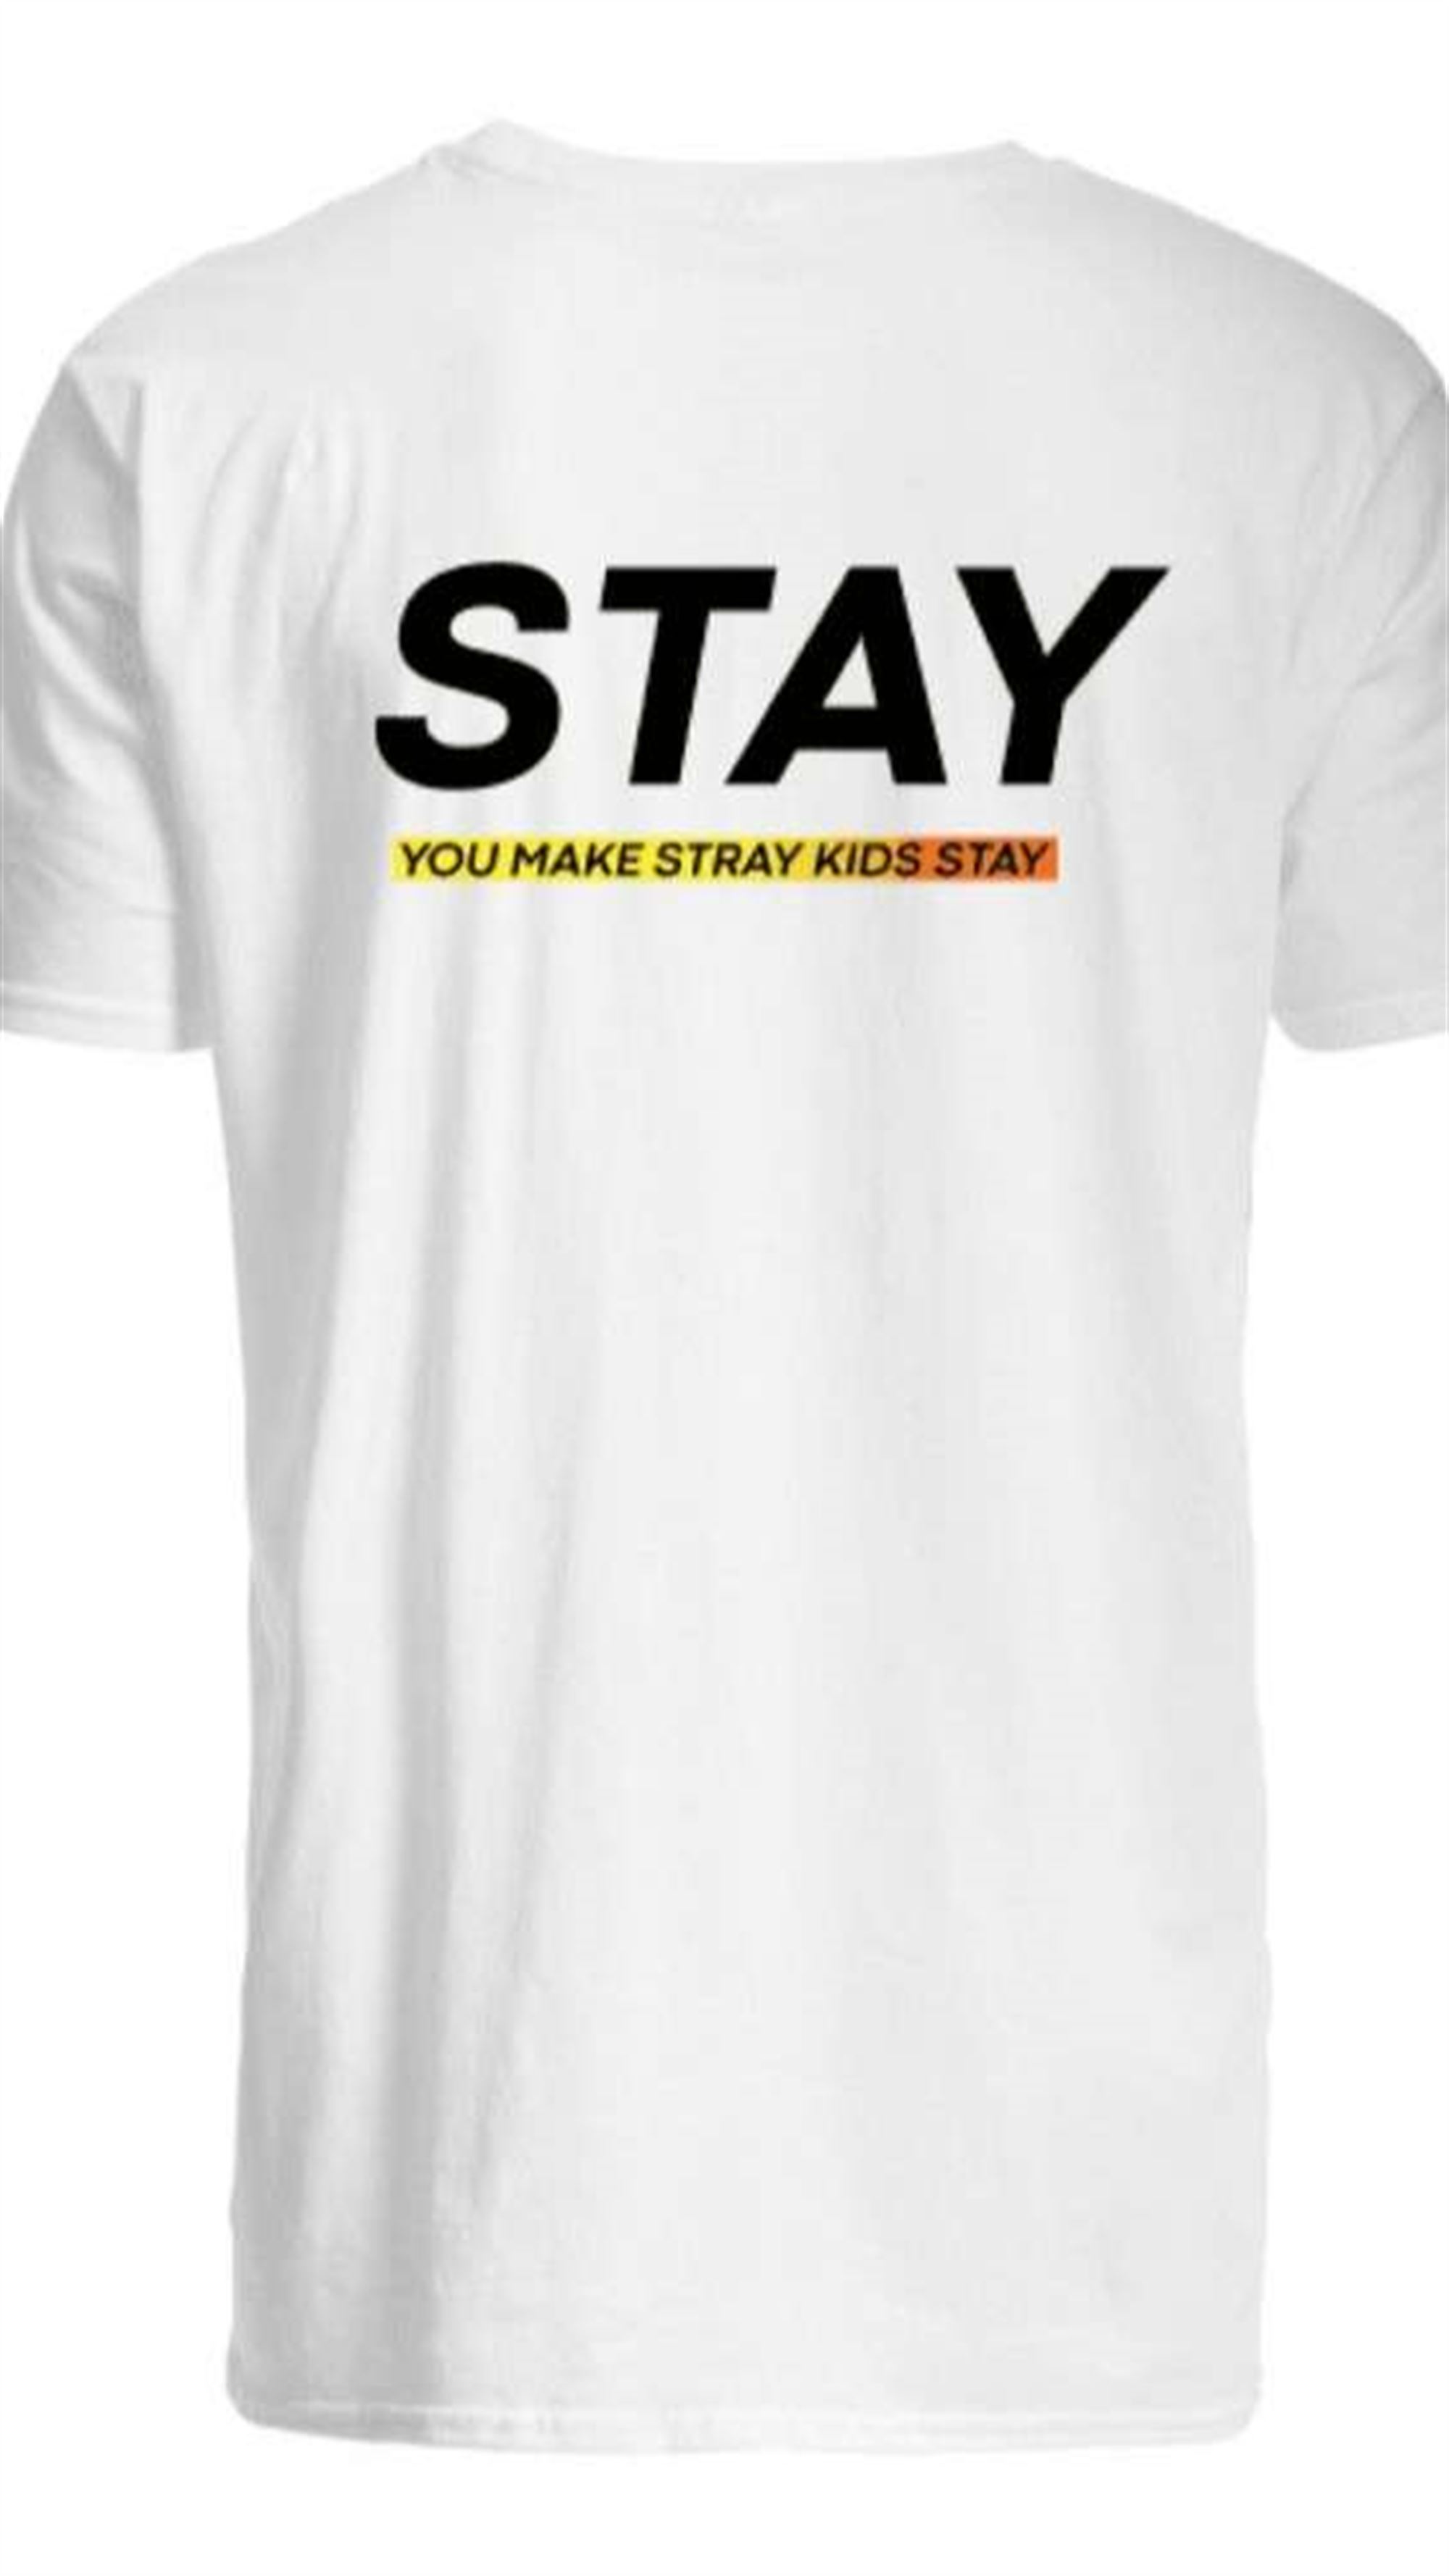 Stay You Make Stray Kids Stay T-shirt Full Size Up To 5xl